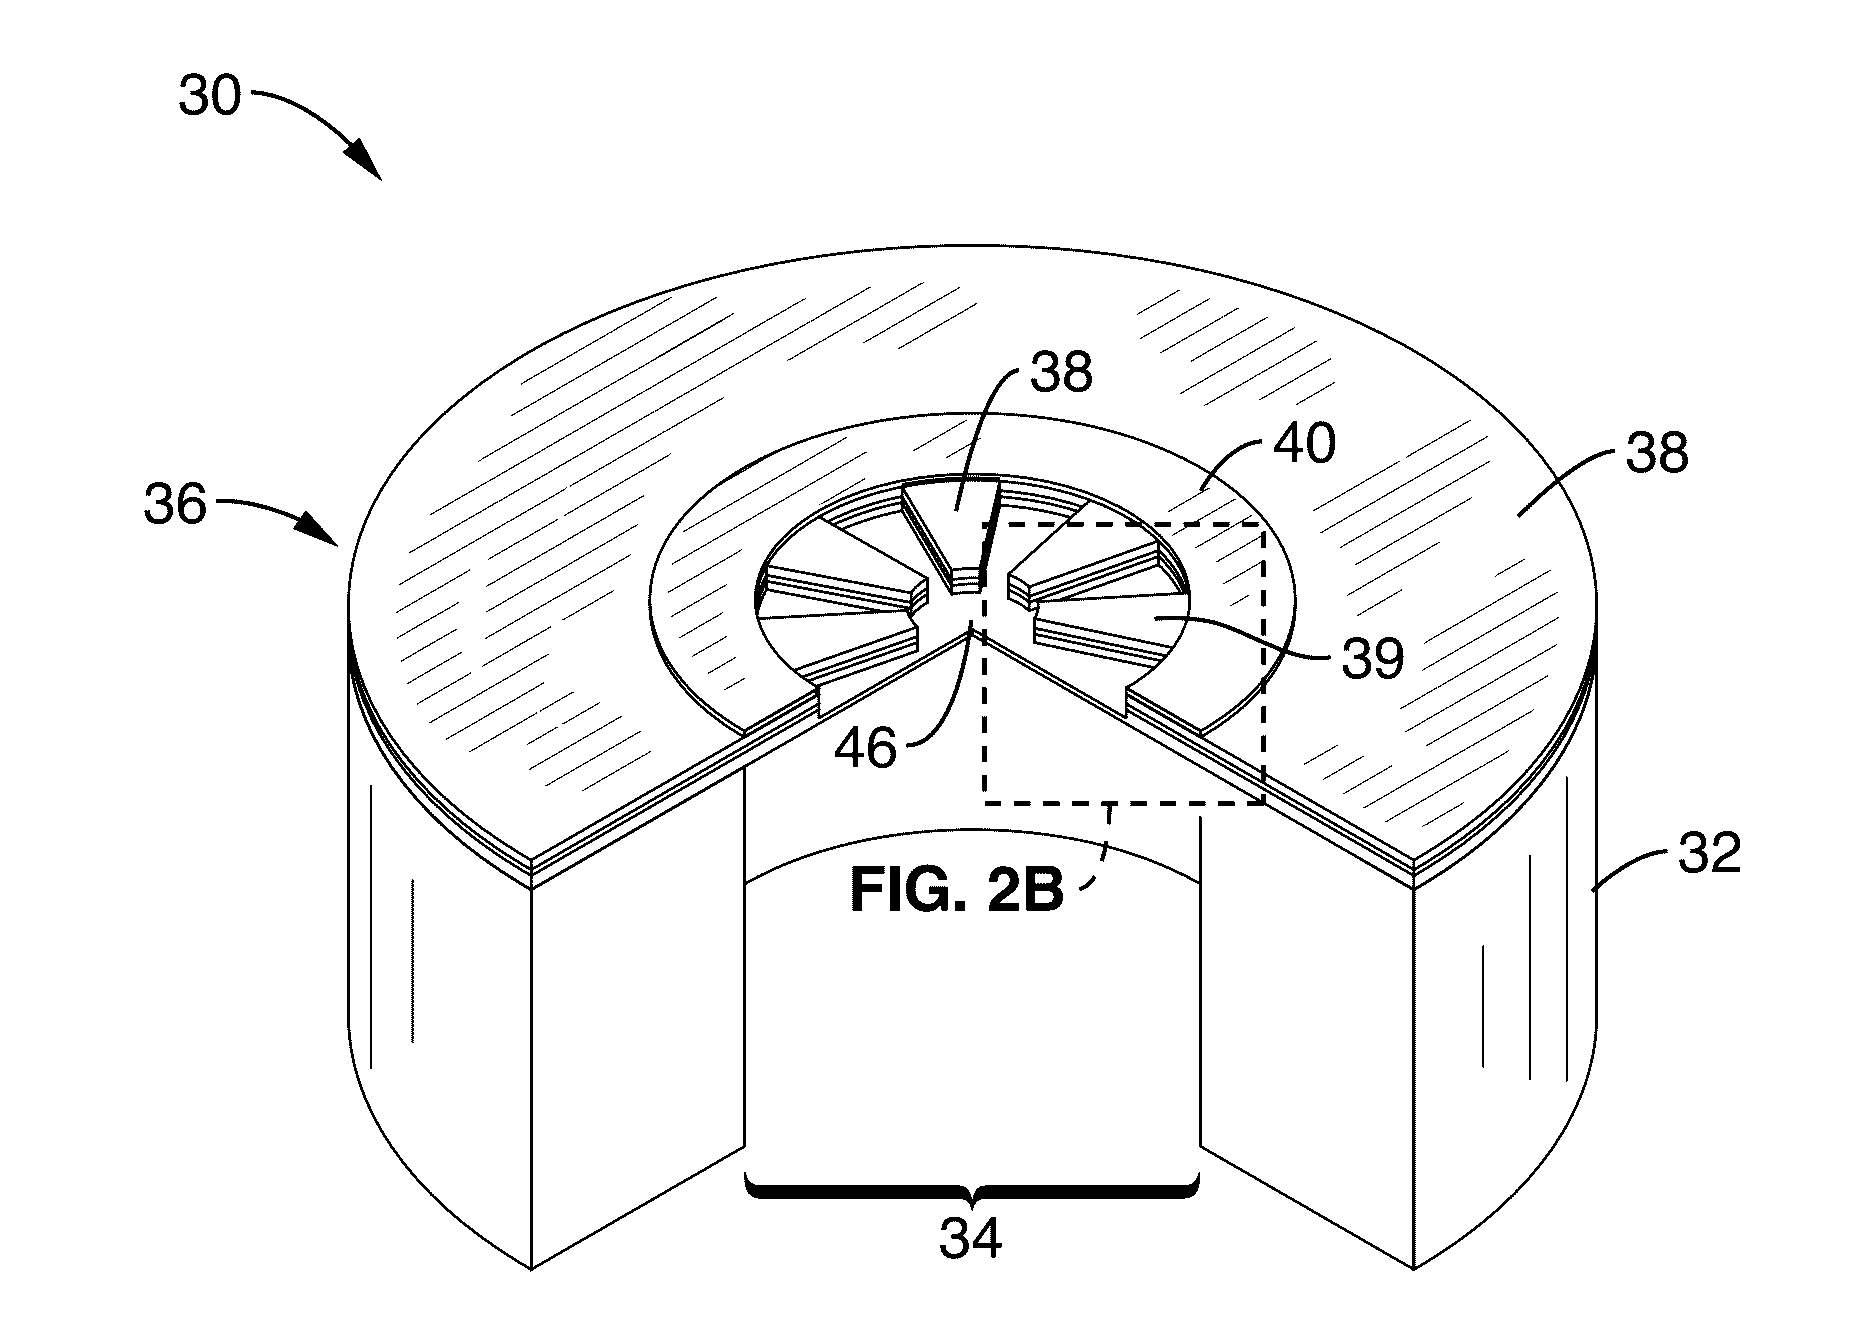 Variable thickness diaphragm for a wideband robust piezoelectric micromachined ultrasonic transducer (PMUT)